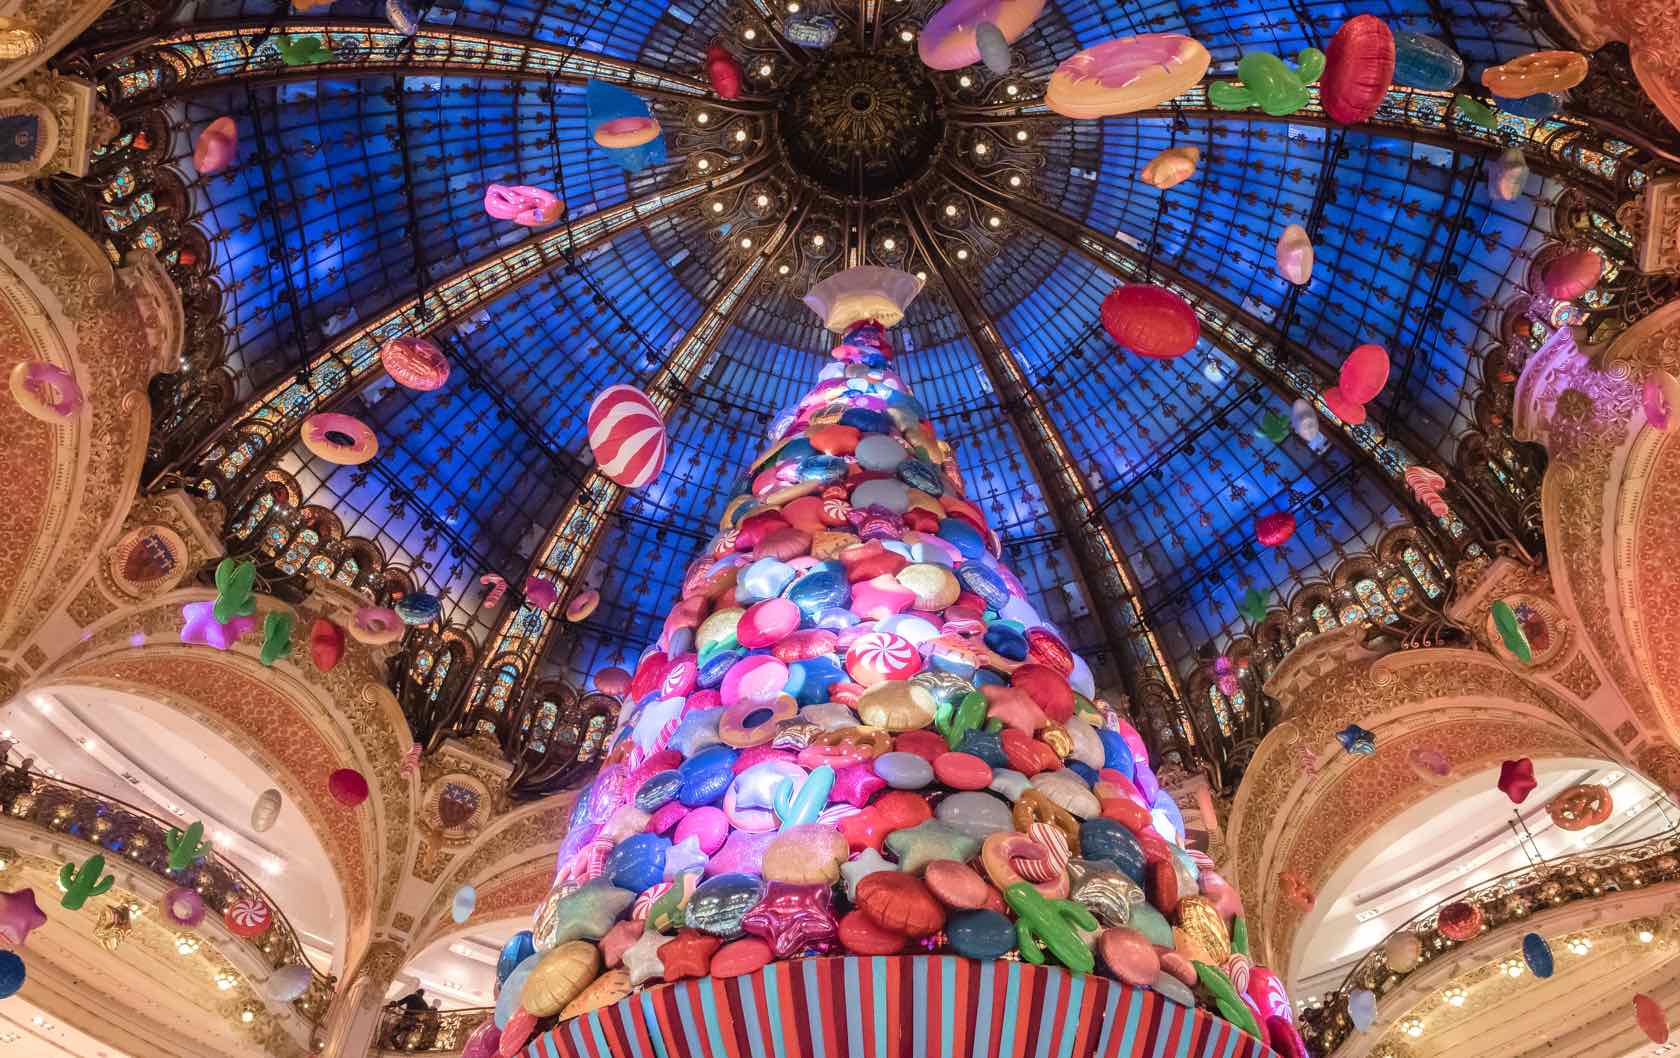 Galeries Lafayette - What To Know BEFORE You Go